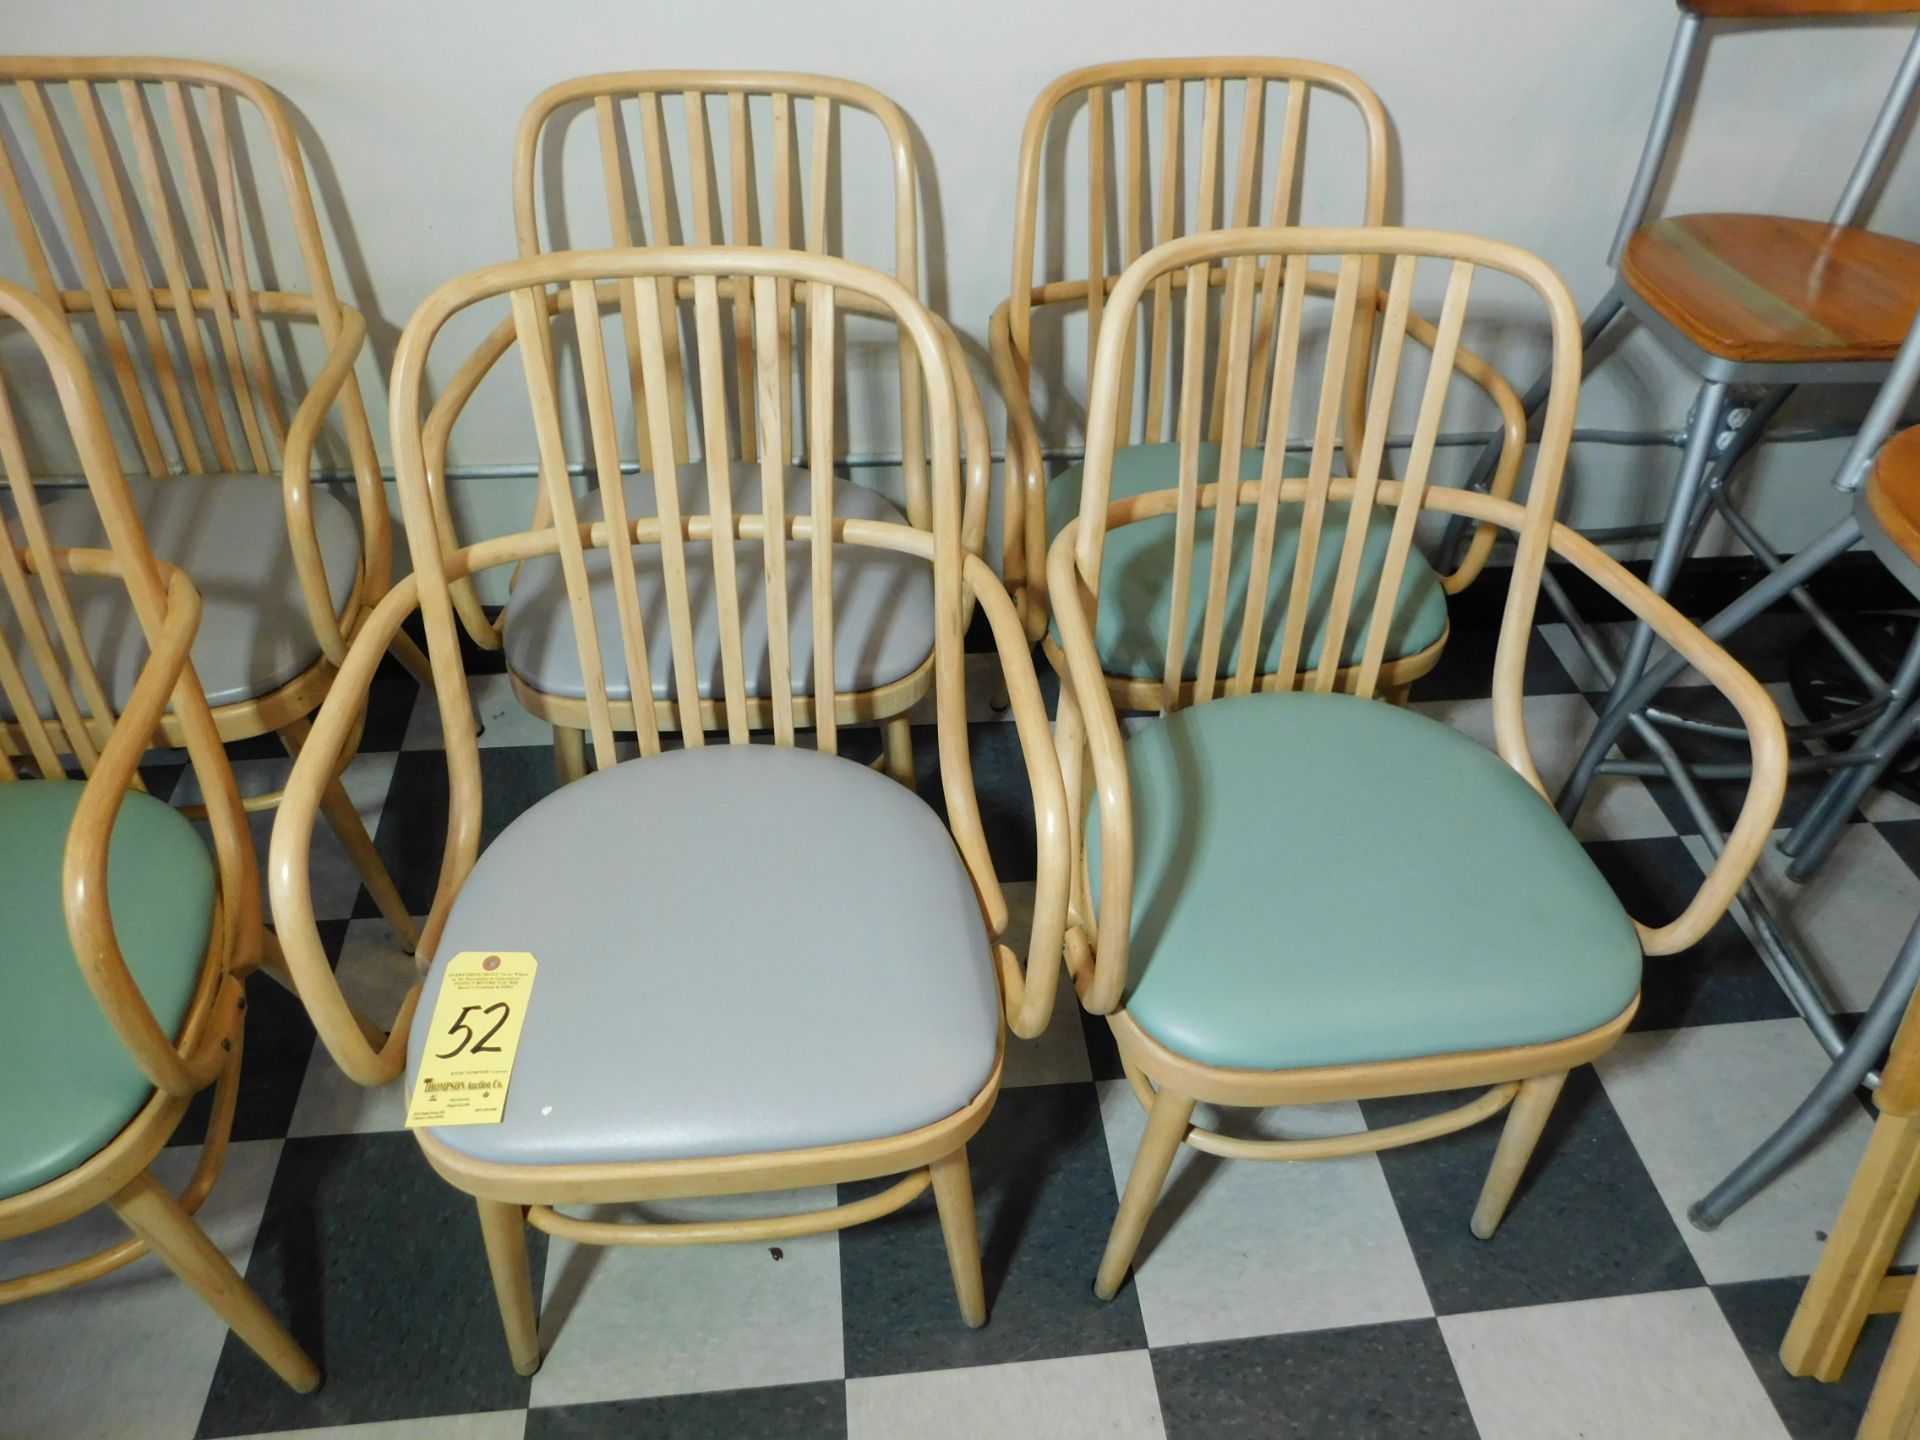 (4) Wooden Chairs with Vinyl Seats, (2) Teal Seats, (2) Gray Seats